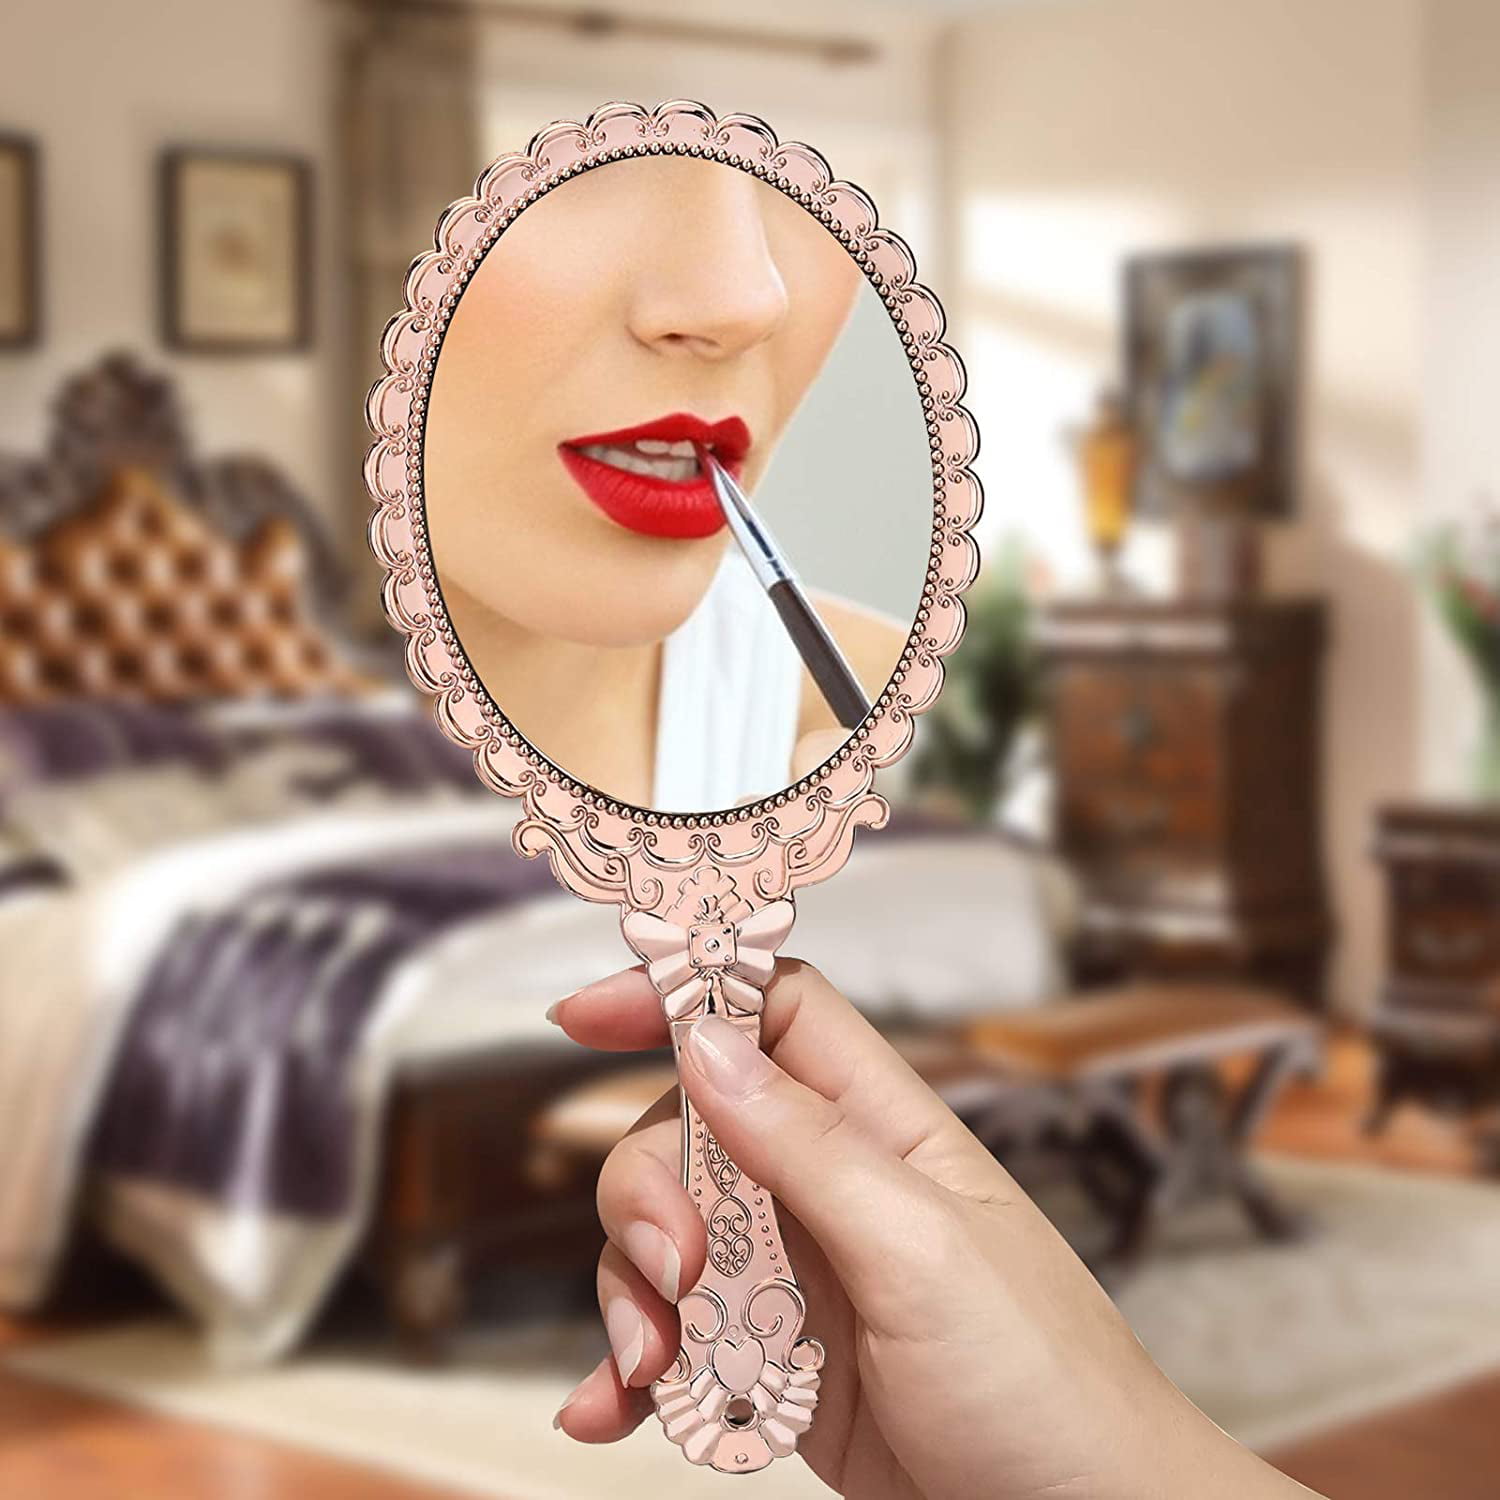 FOMIYES Hand held Mirrors Retro Decor Mini Mirrors Vintage Makeup Mirror  with Stand Portable Compact Table Mirror Rotating Mirror Magnifying Mirror